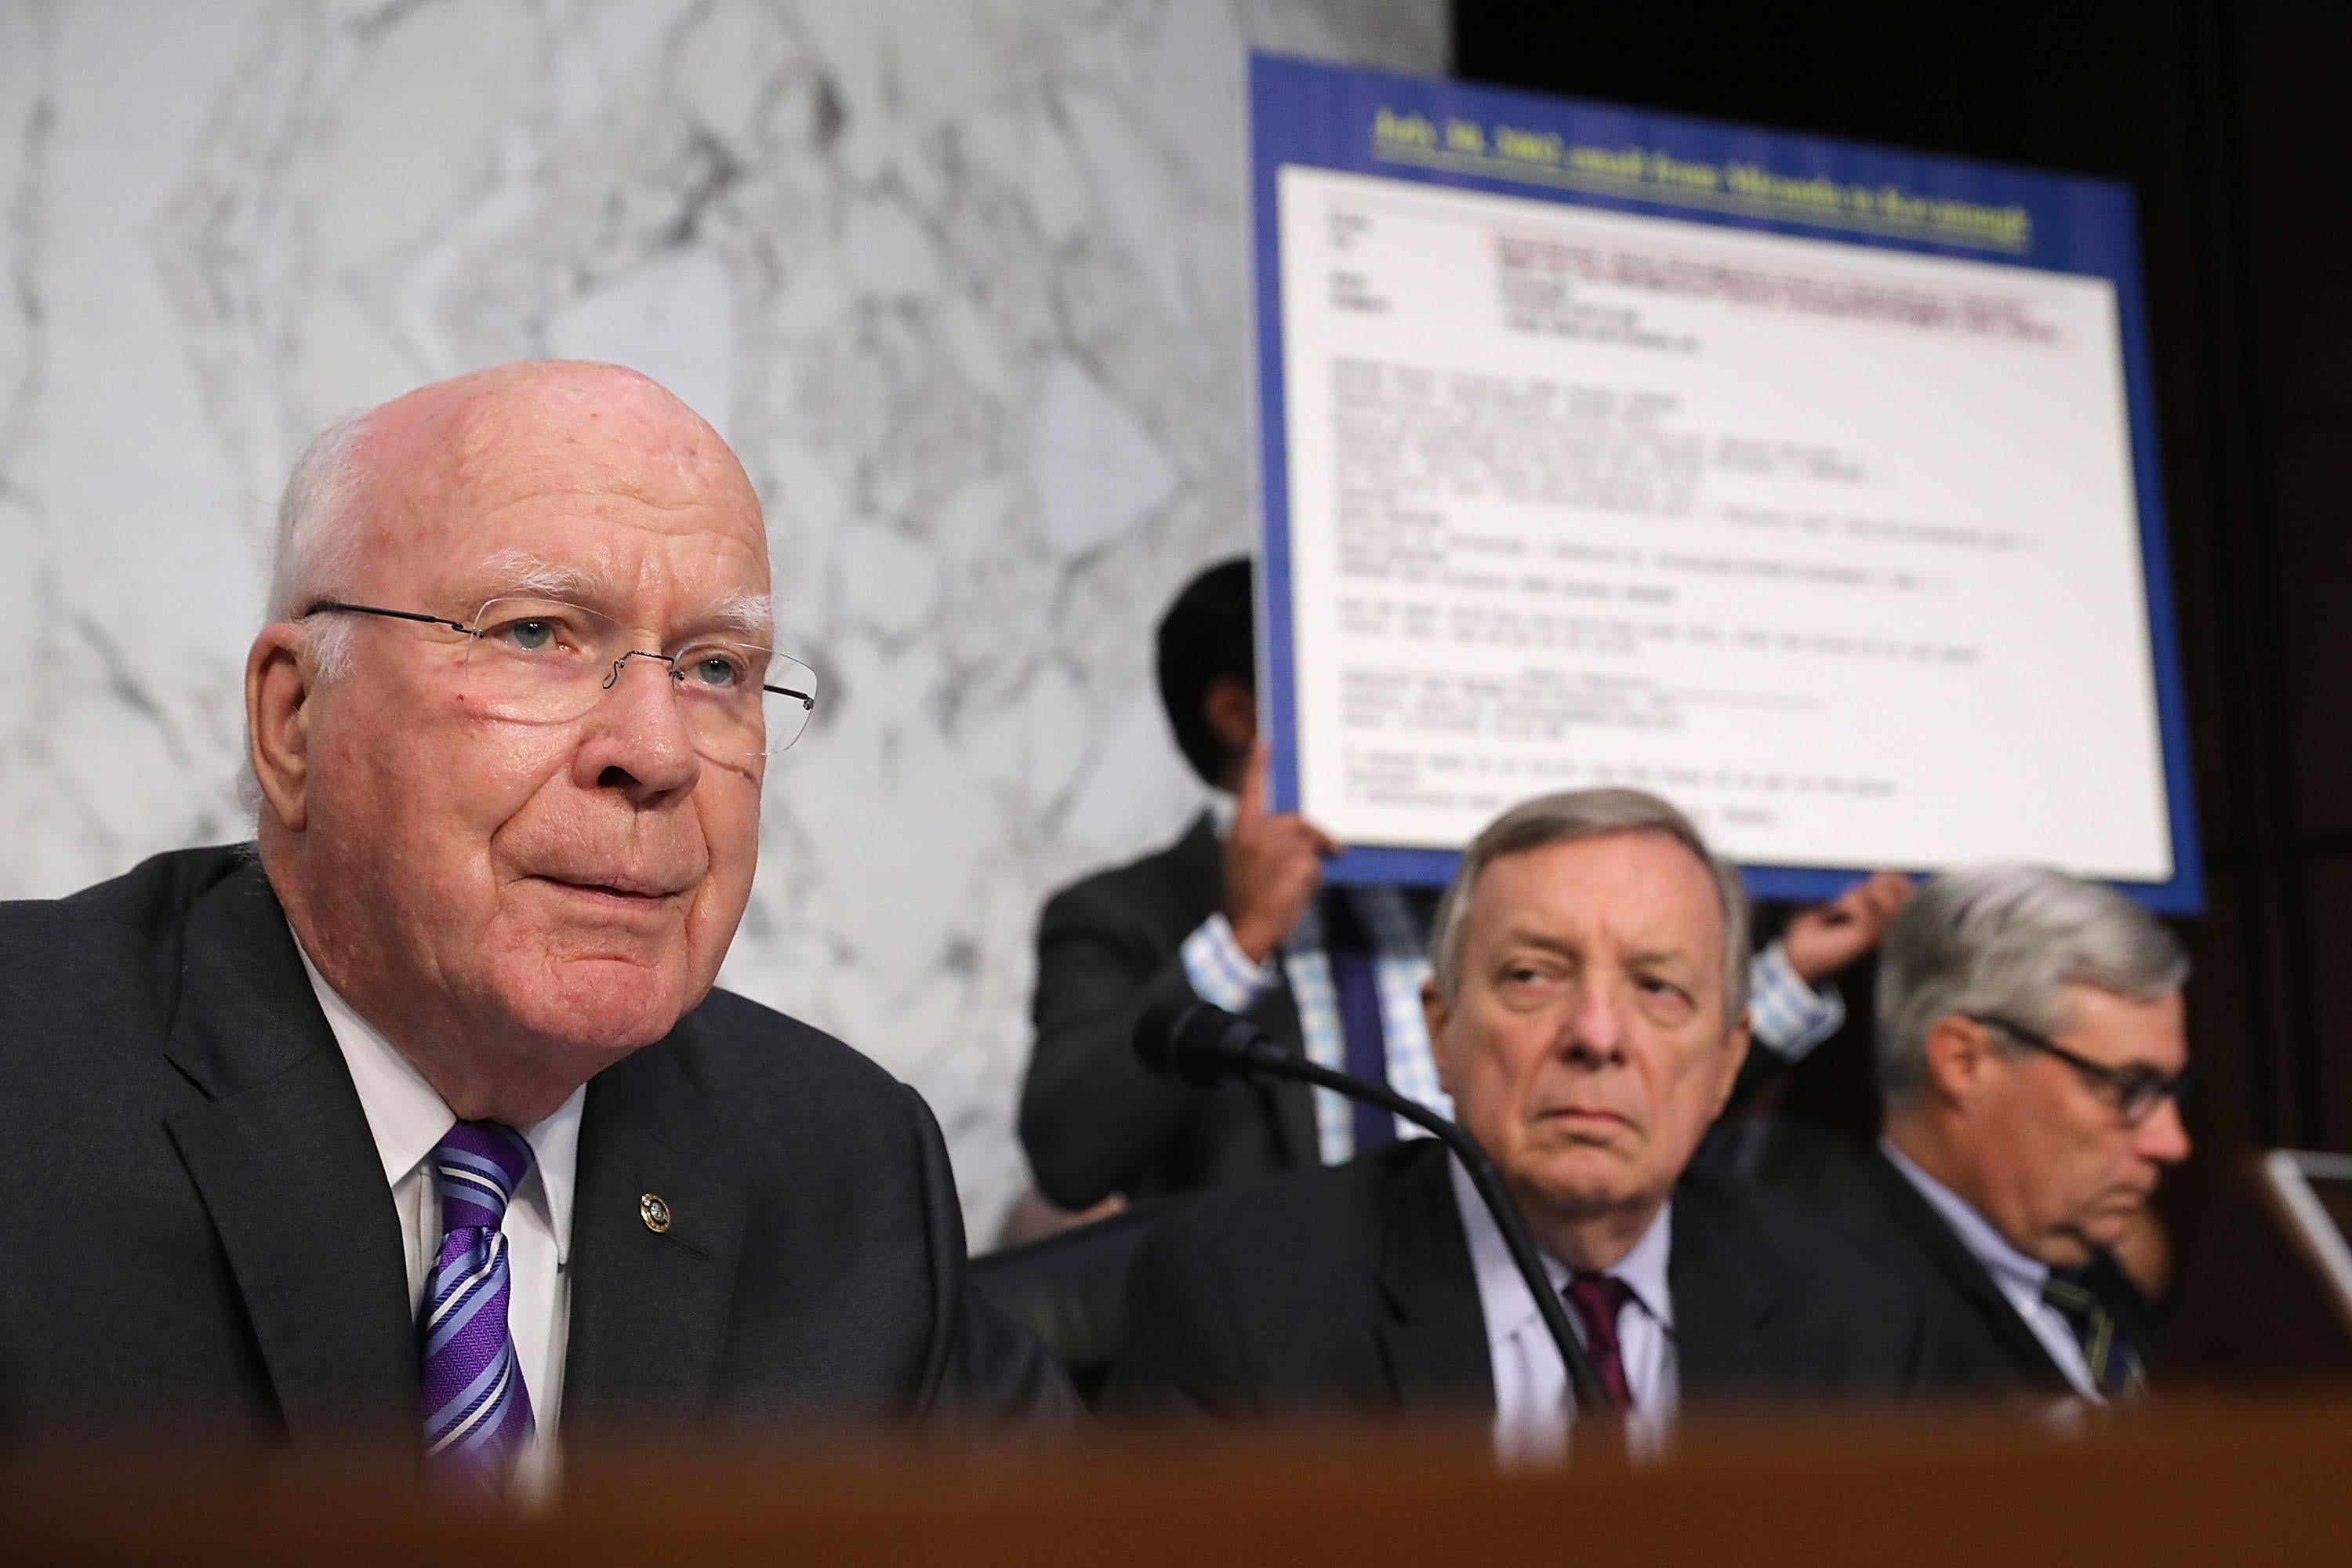 Sen. Patrick Leahy beside other members of the Senate Judiciary Committee.